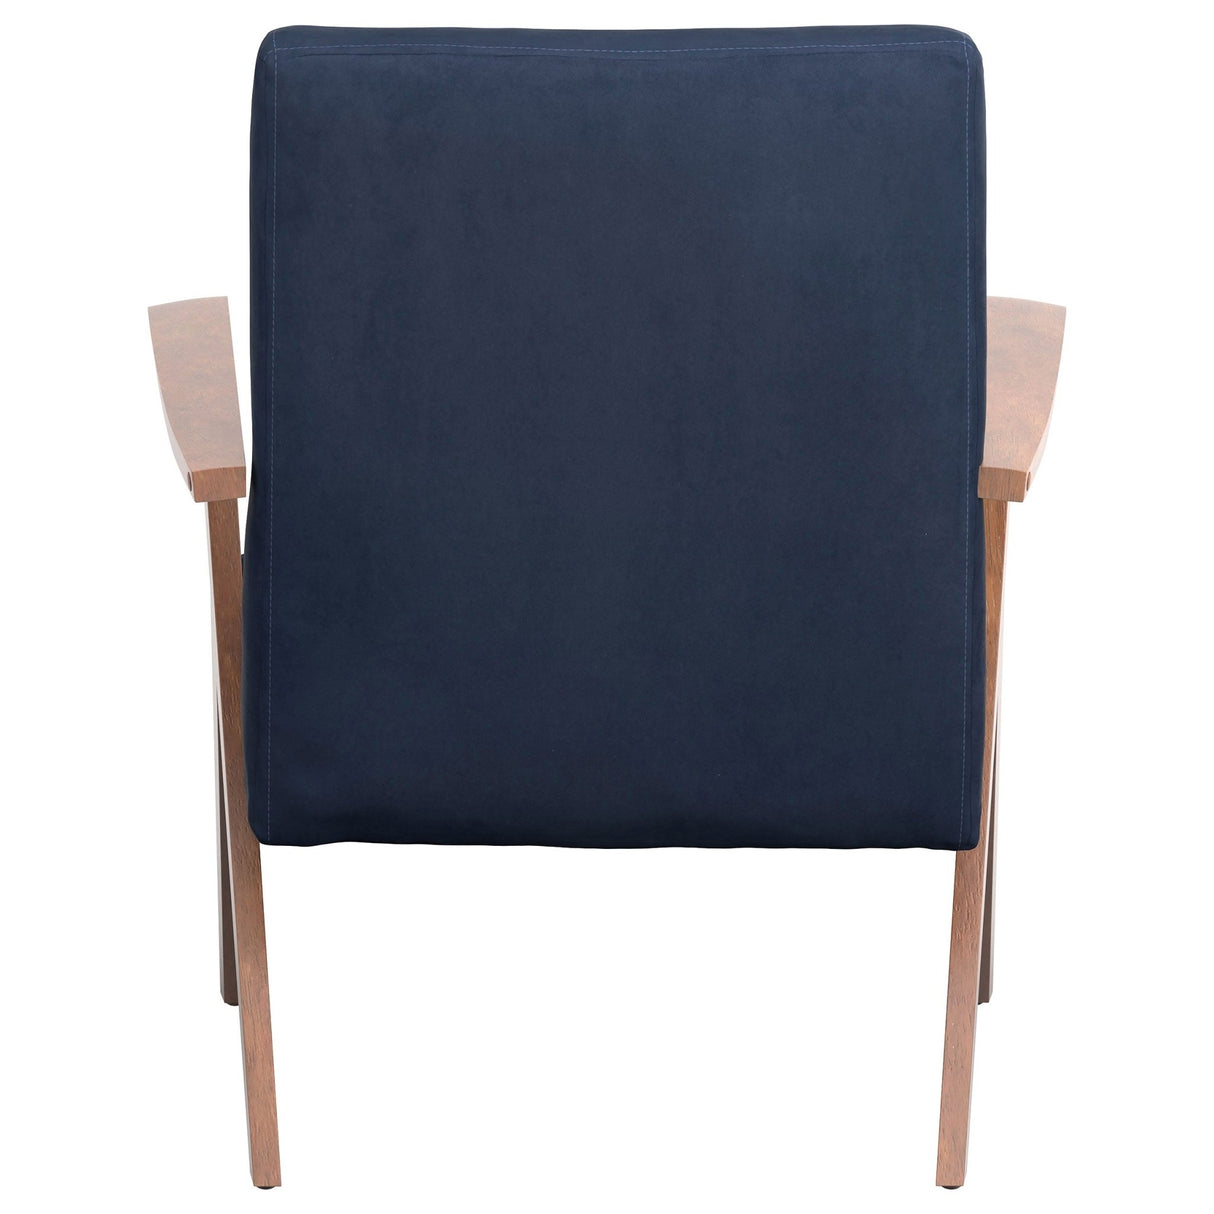 Accent Chair - Cheryl Wooden Arms Accent Chair Dark Blue and Walnut - Accent Chairs - 905415 - image - 7